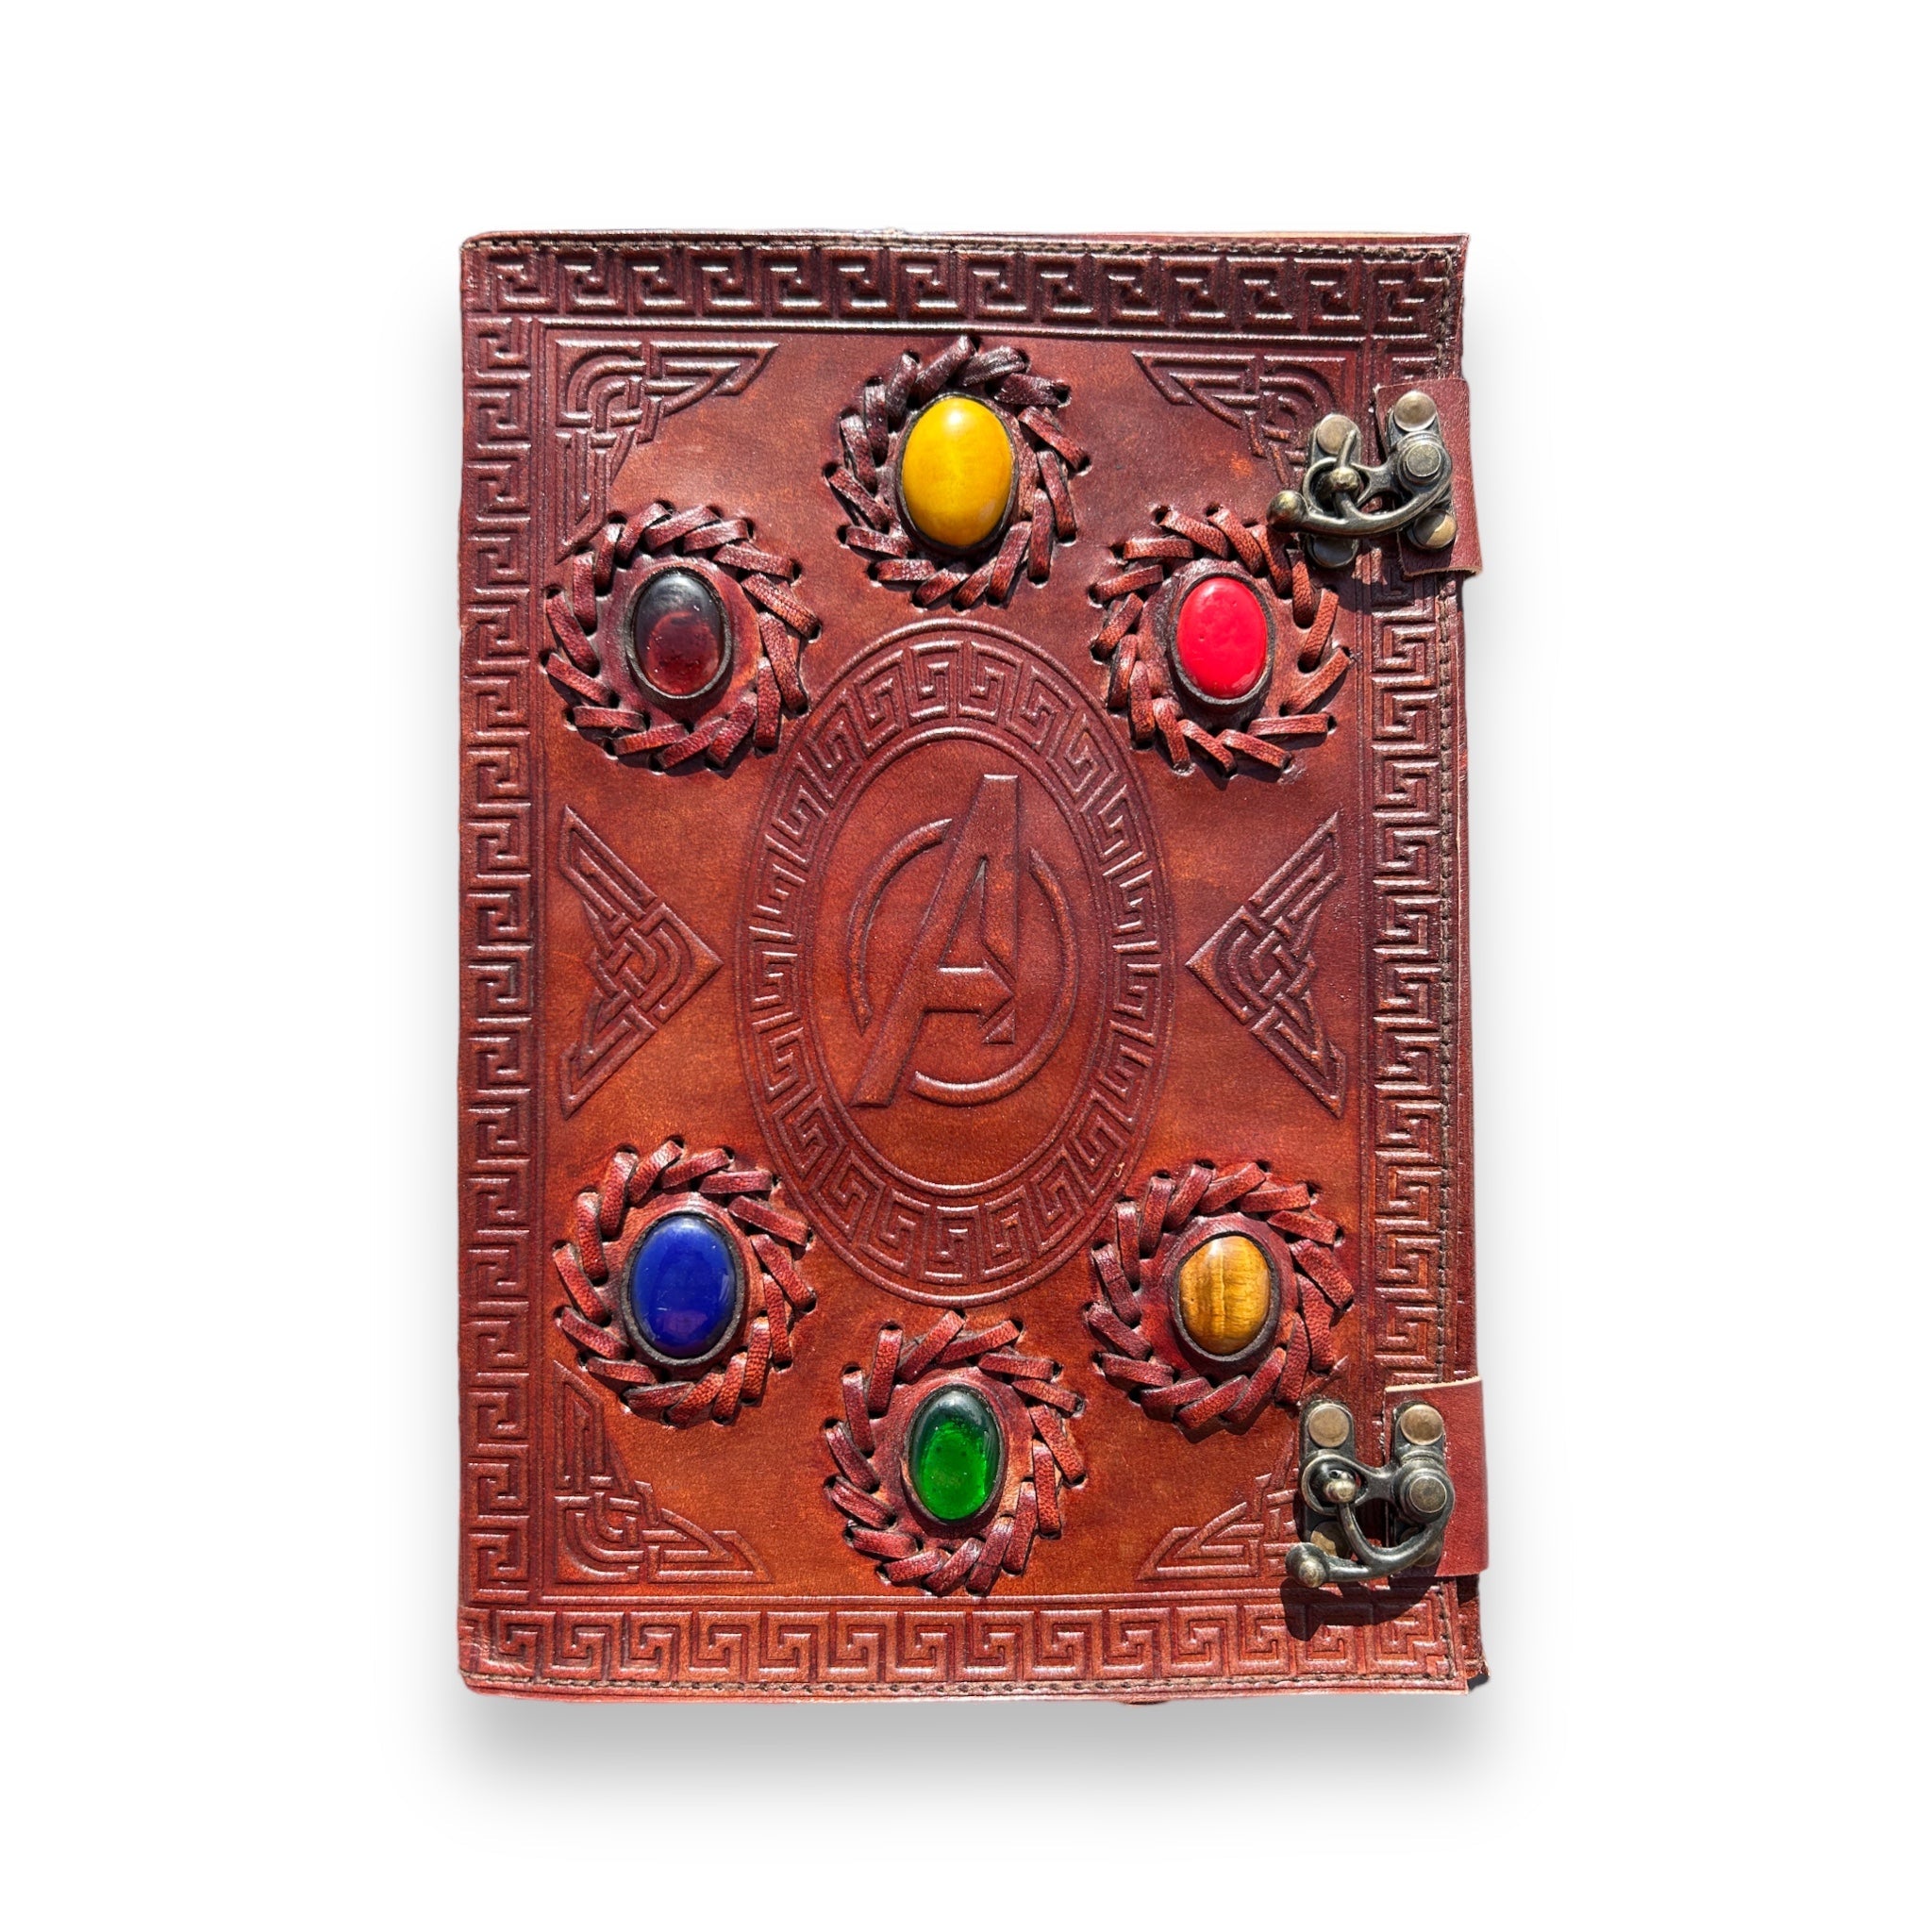 Avenger Leather Journal With Stones